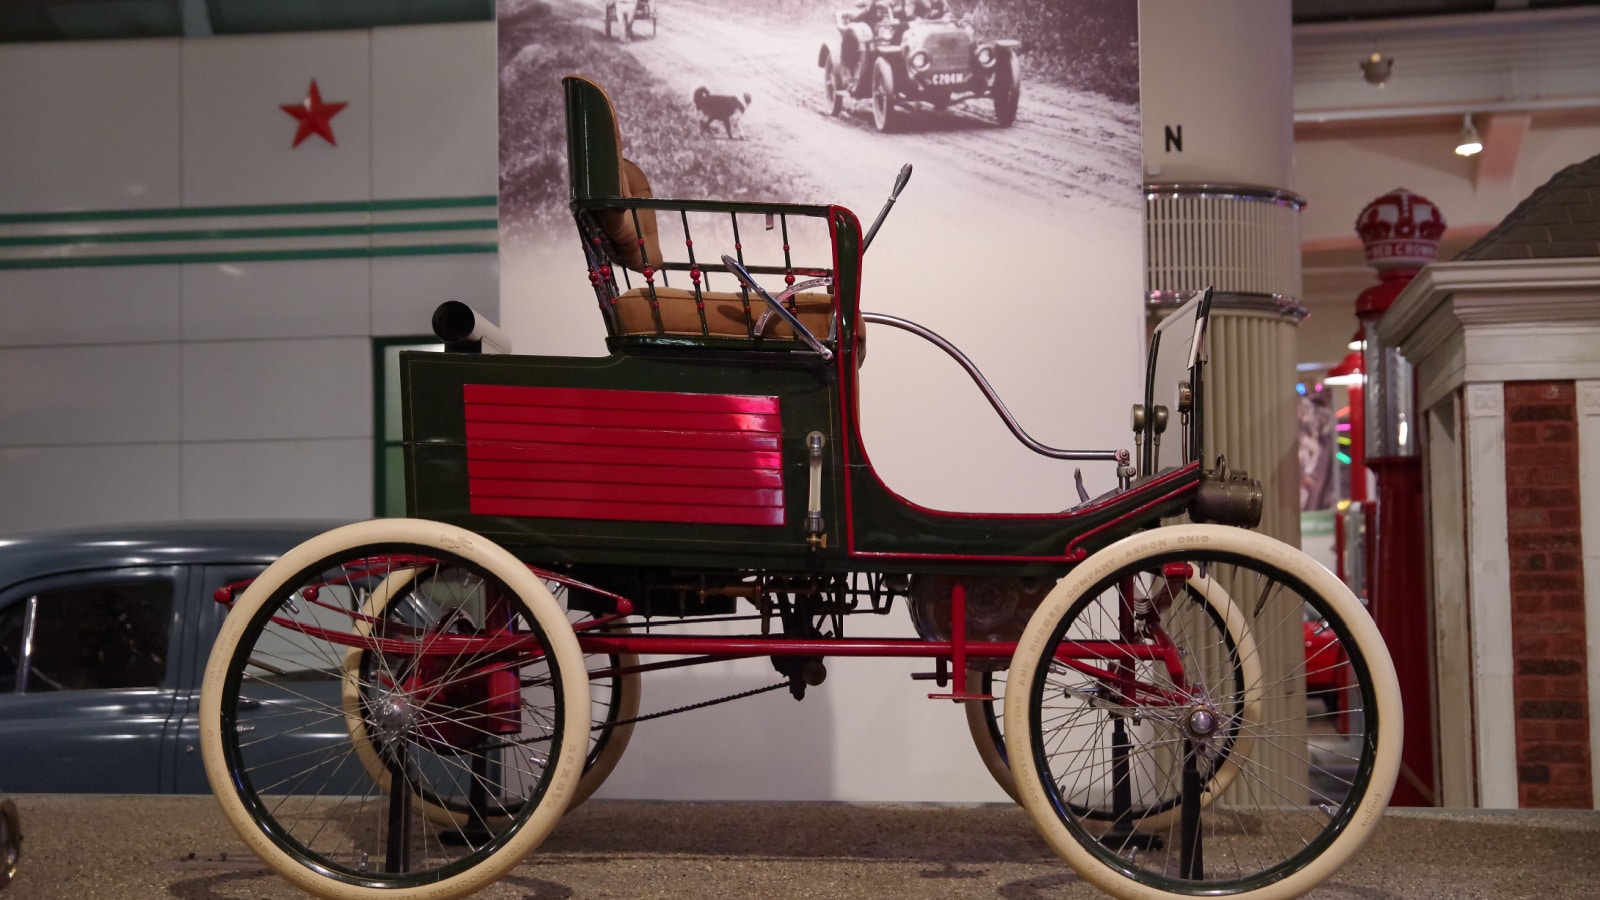 Dearborn, Mi, USA - 24 November 2018: Henry Ford Museum of American Innovation is National Historic Landmark in the Detroit suburb of Dearborn, Michigan, United States.